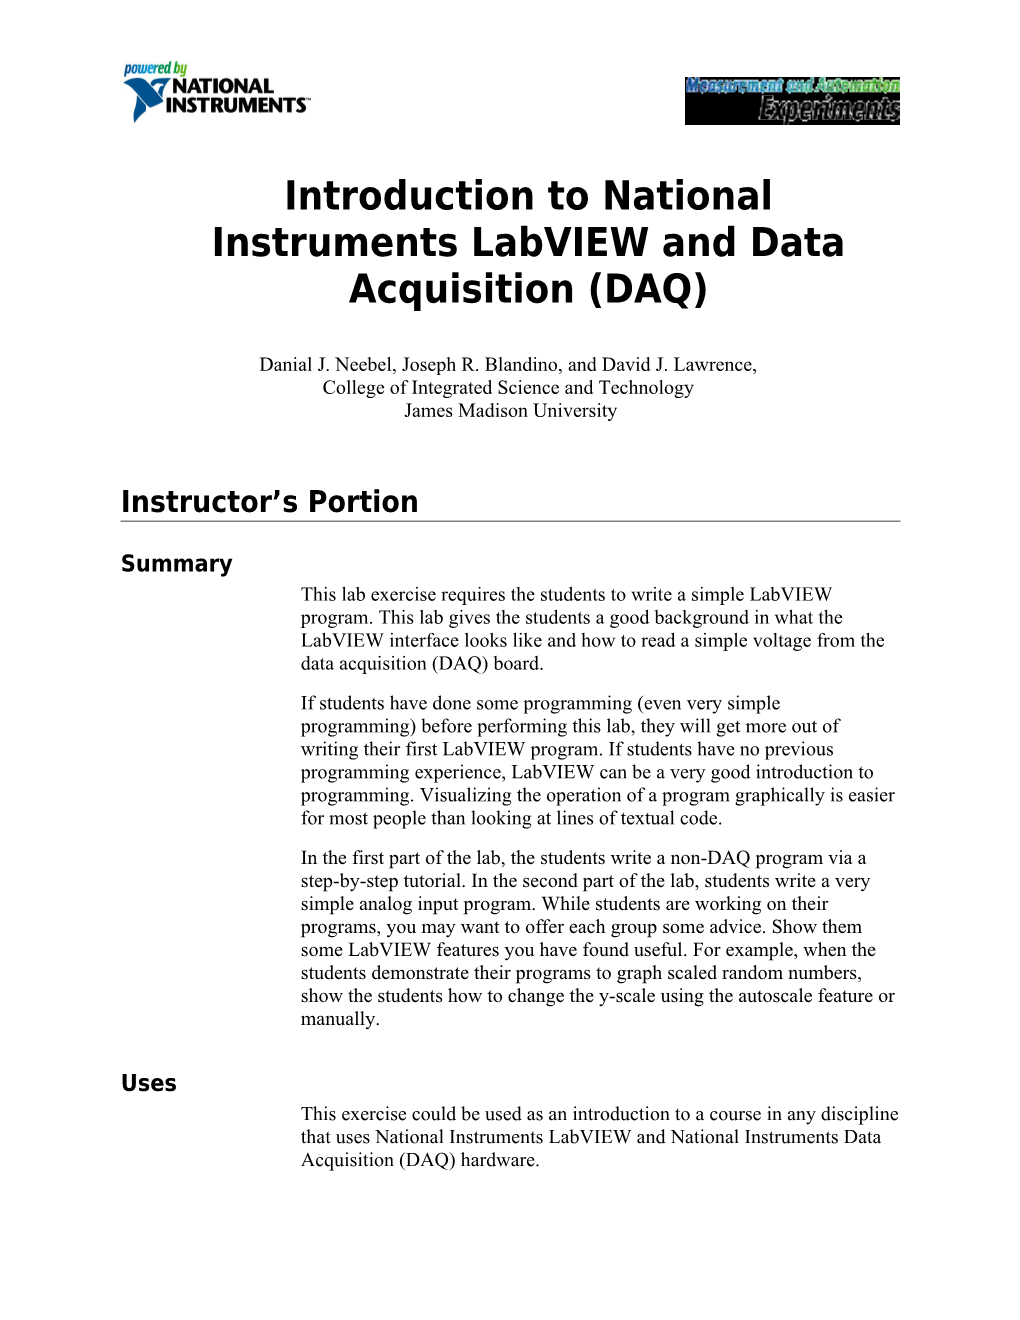 Introduction to National Instruments Labview and Data Acquisition (DAQ)